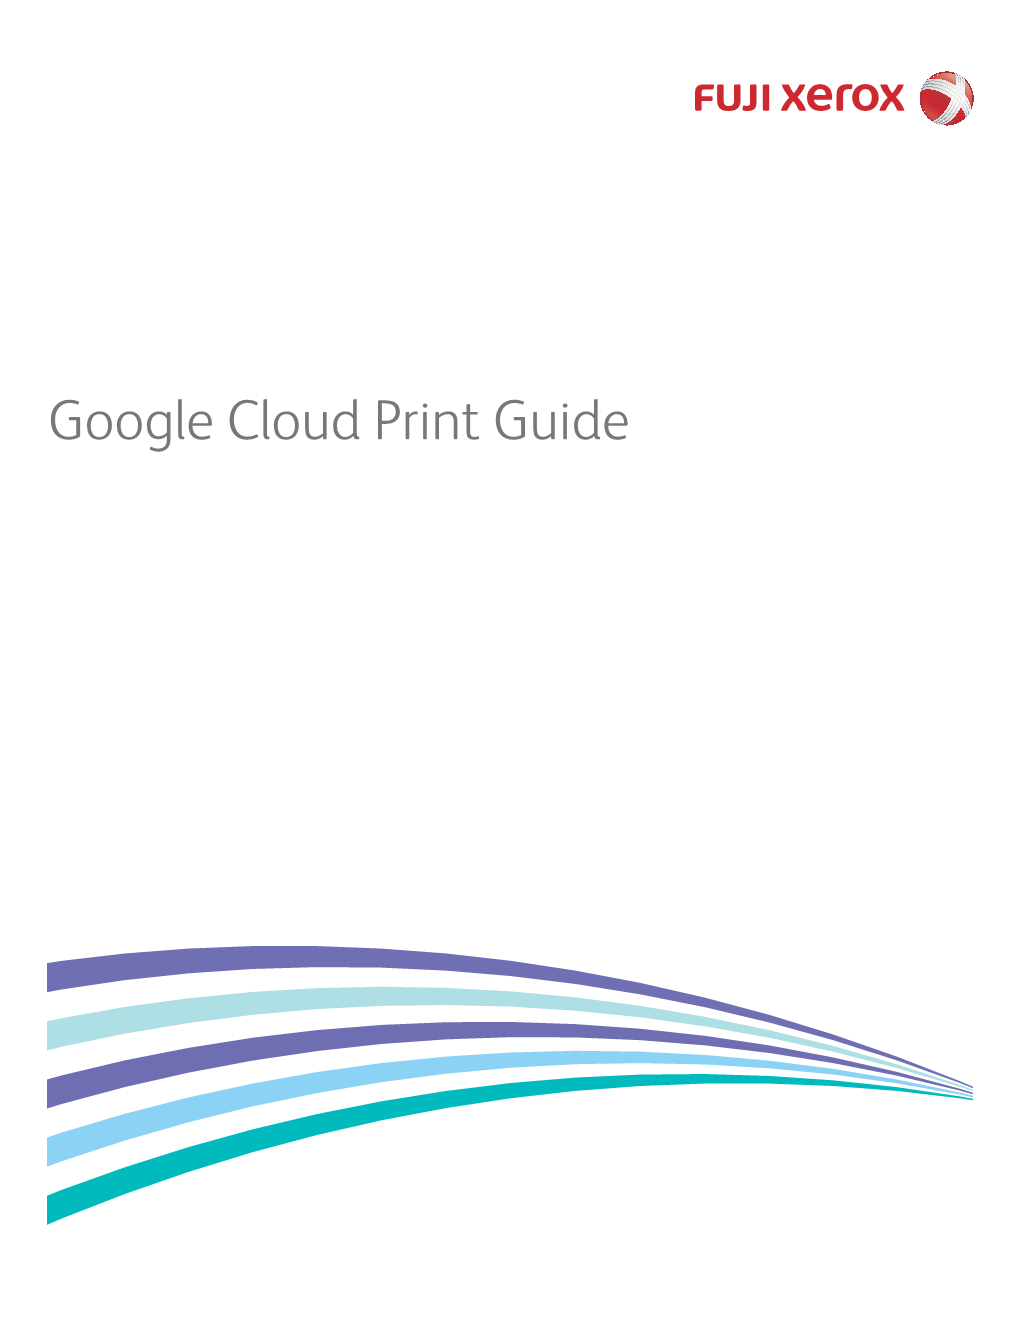 Google Cloud Print Guide Definitions of Notes